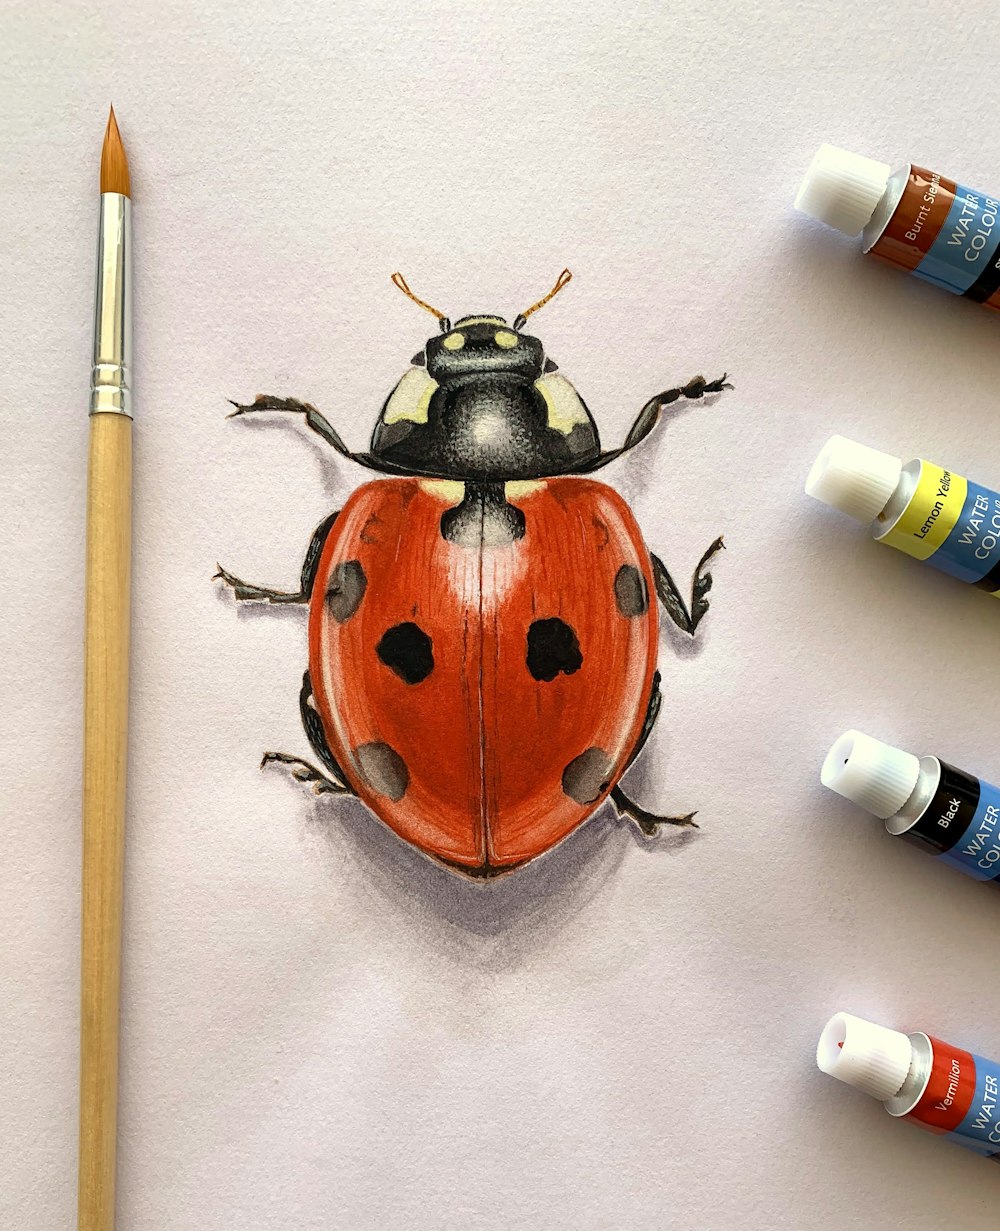 a drawing of a ladybug on a piece of paper